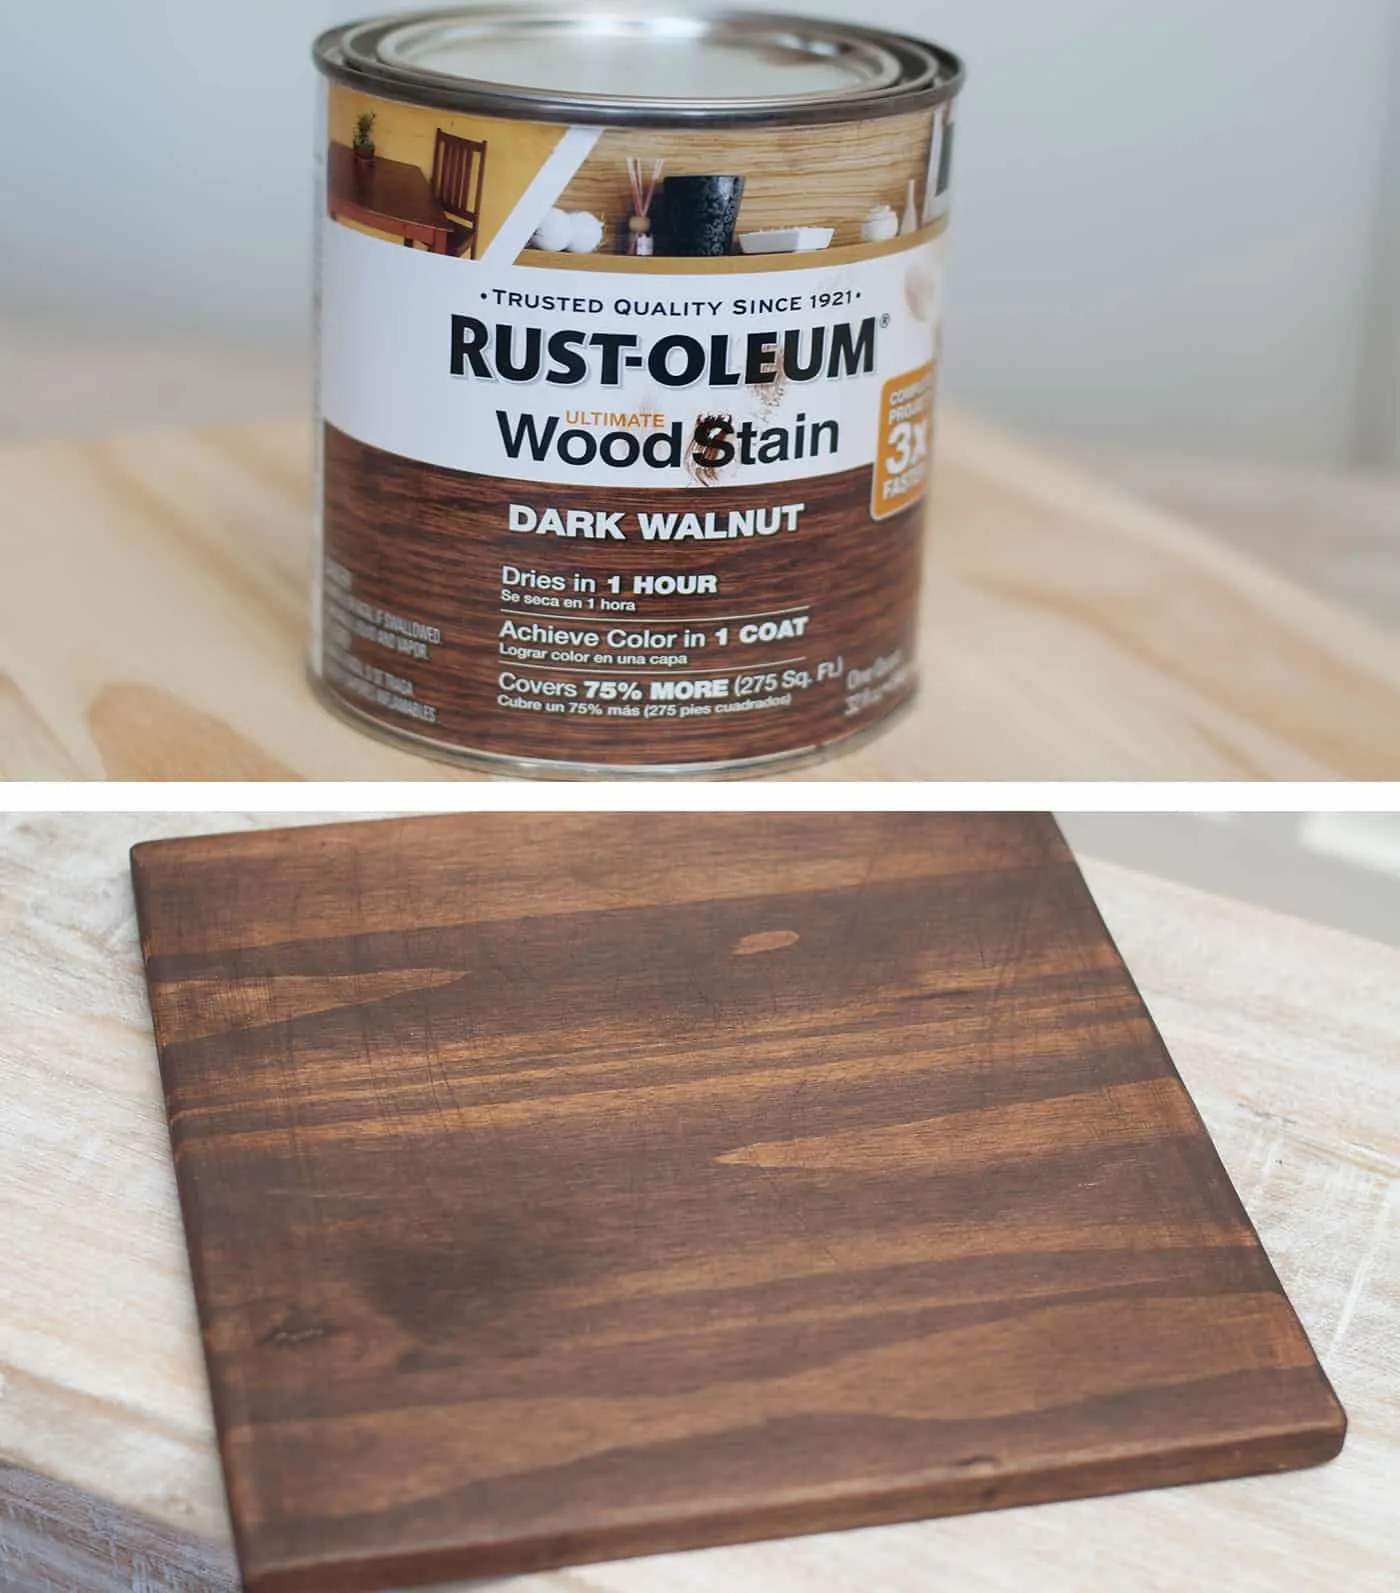 can of Rust-oleum wood stain in dark walnut and a stained piece of wood